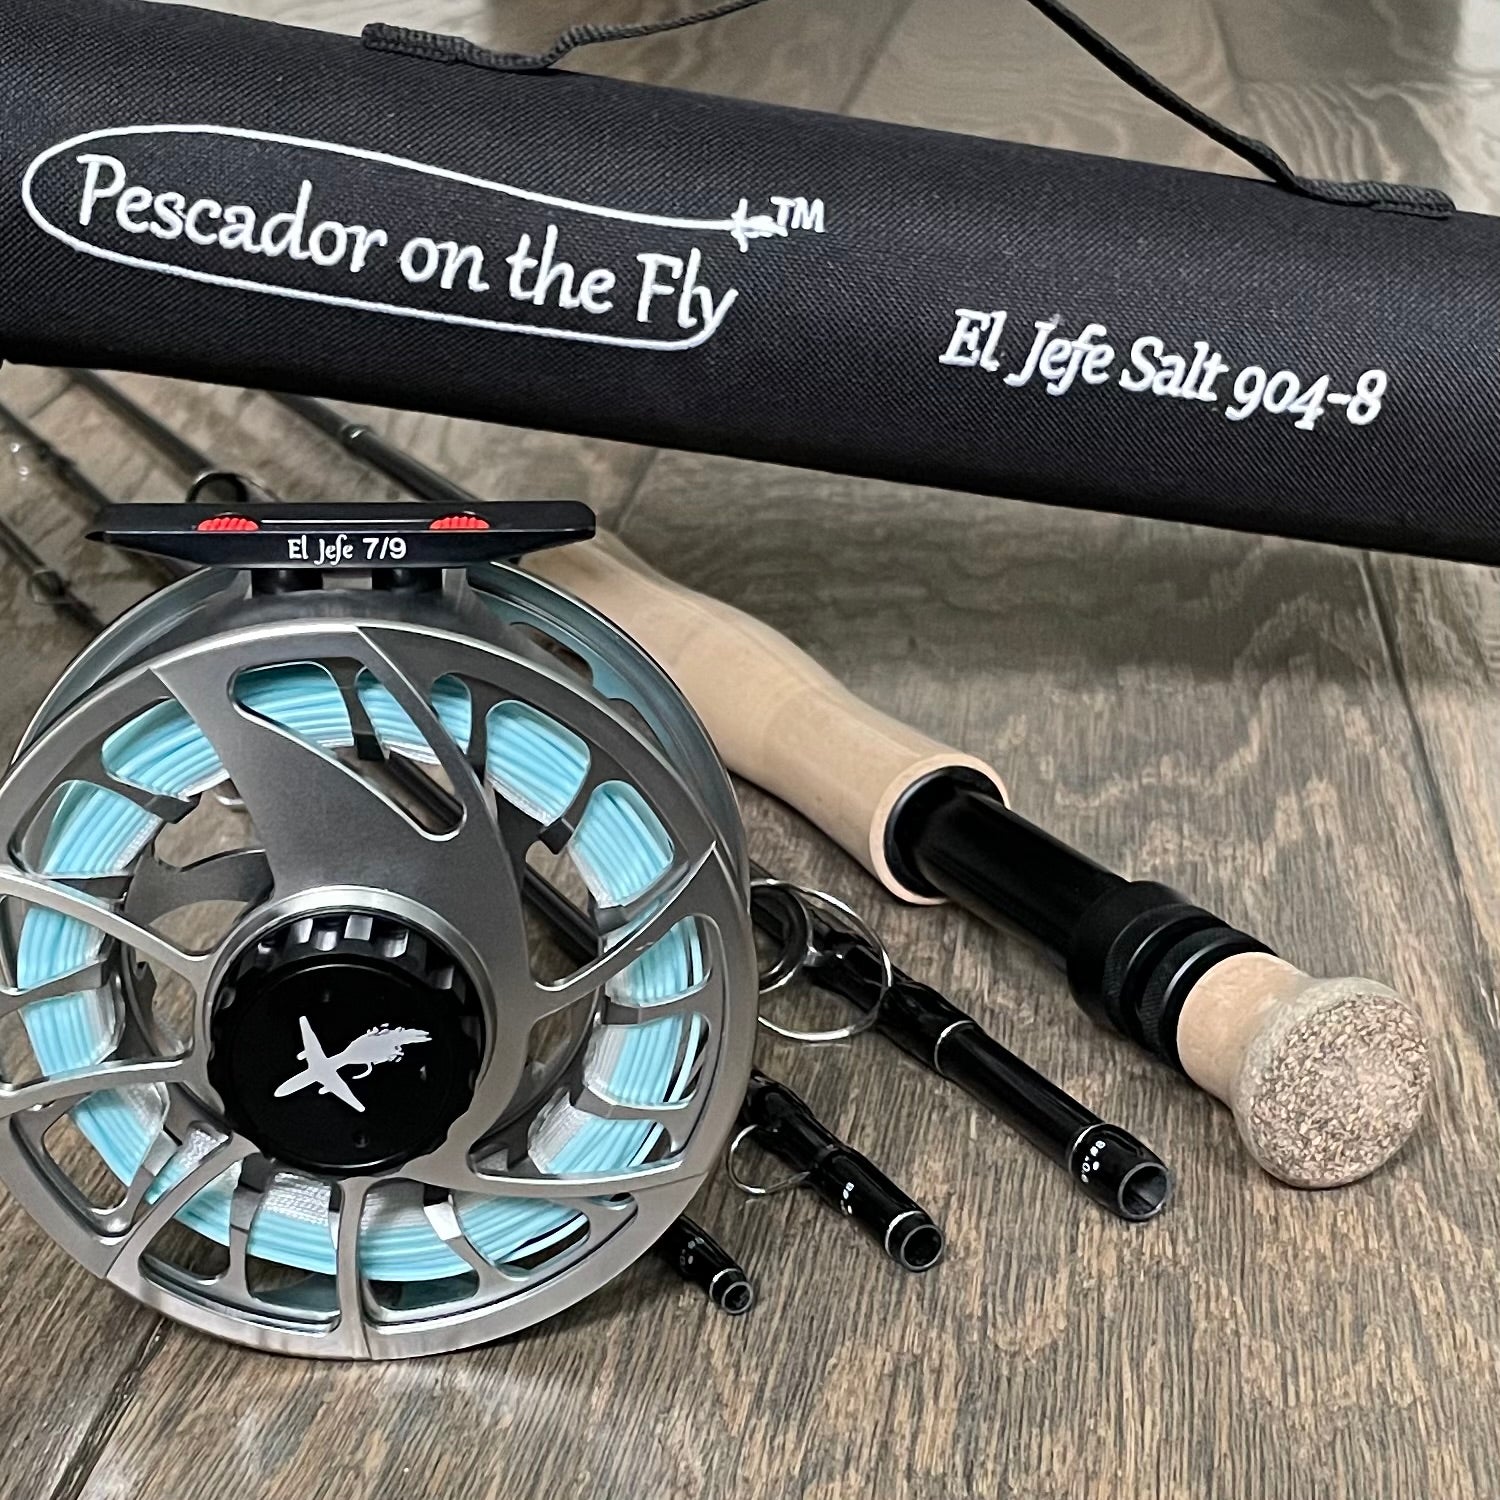 Fly Rods IM8 Carbon Fiber/Loaded Reel - sporting goods - by owner